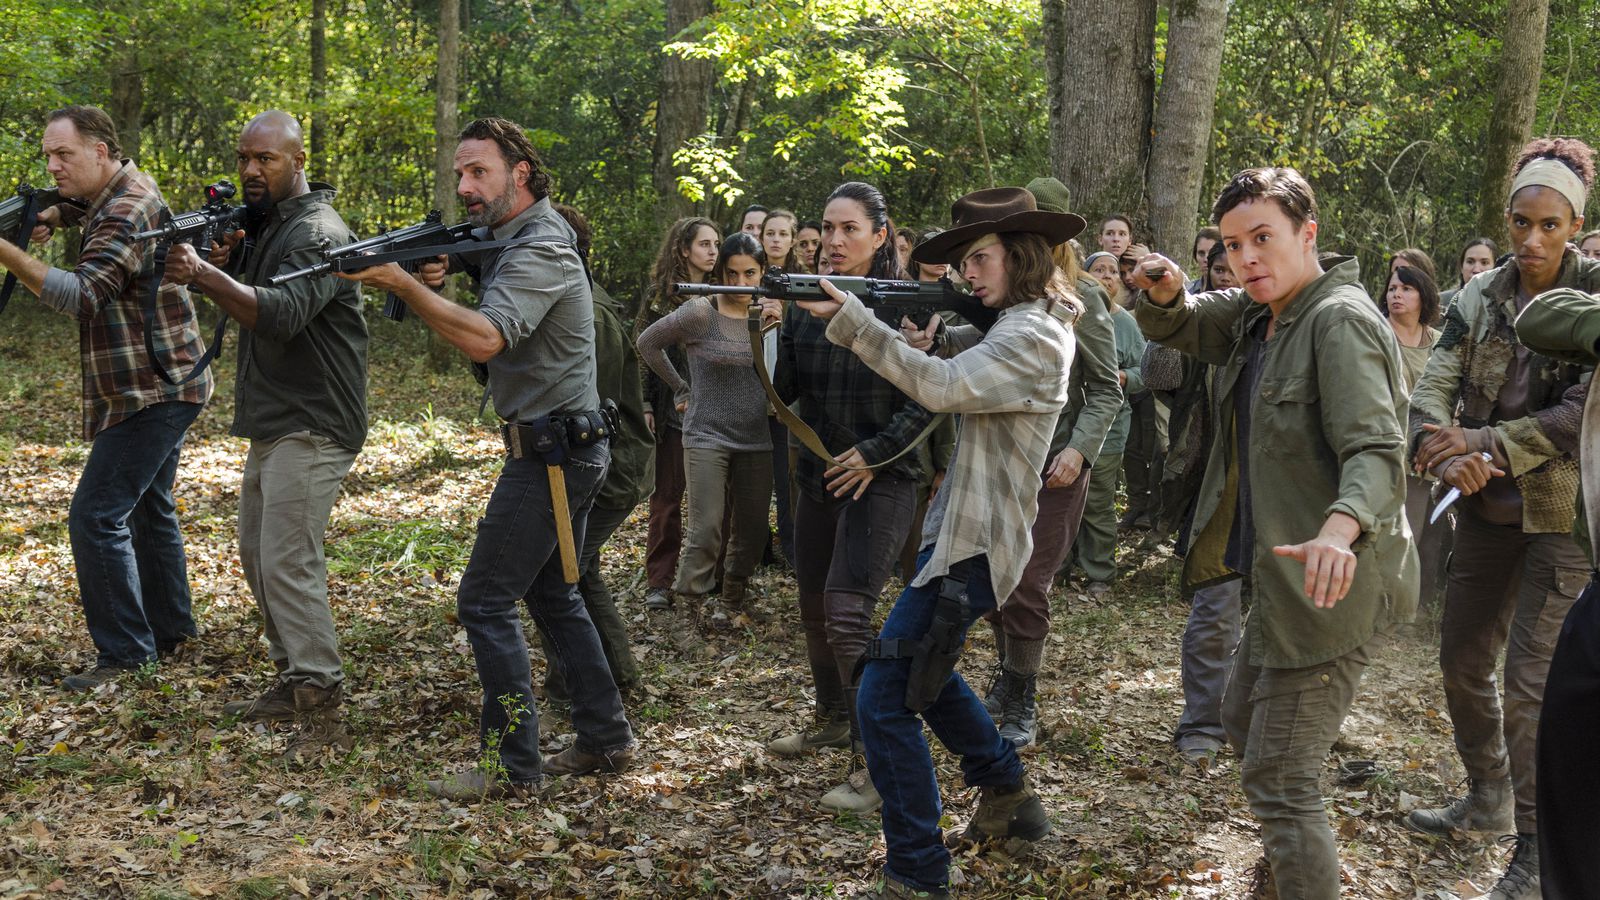 The Walking Dead’s season finale is shaping up to be a disappointment.